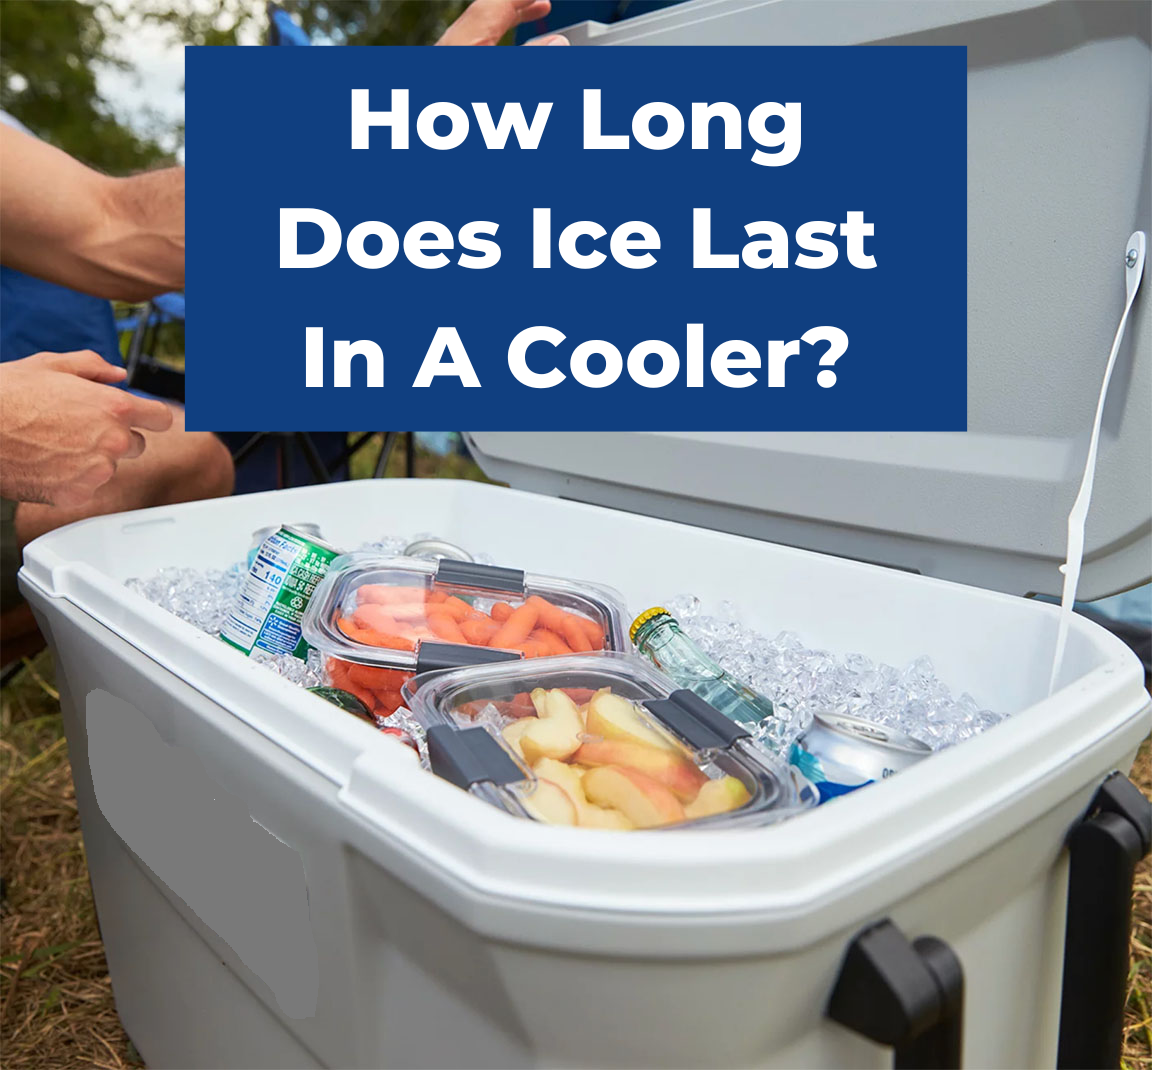 How Long Does Ice Last In A Cooler